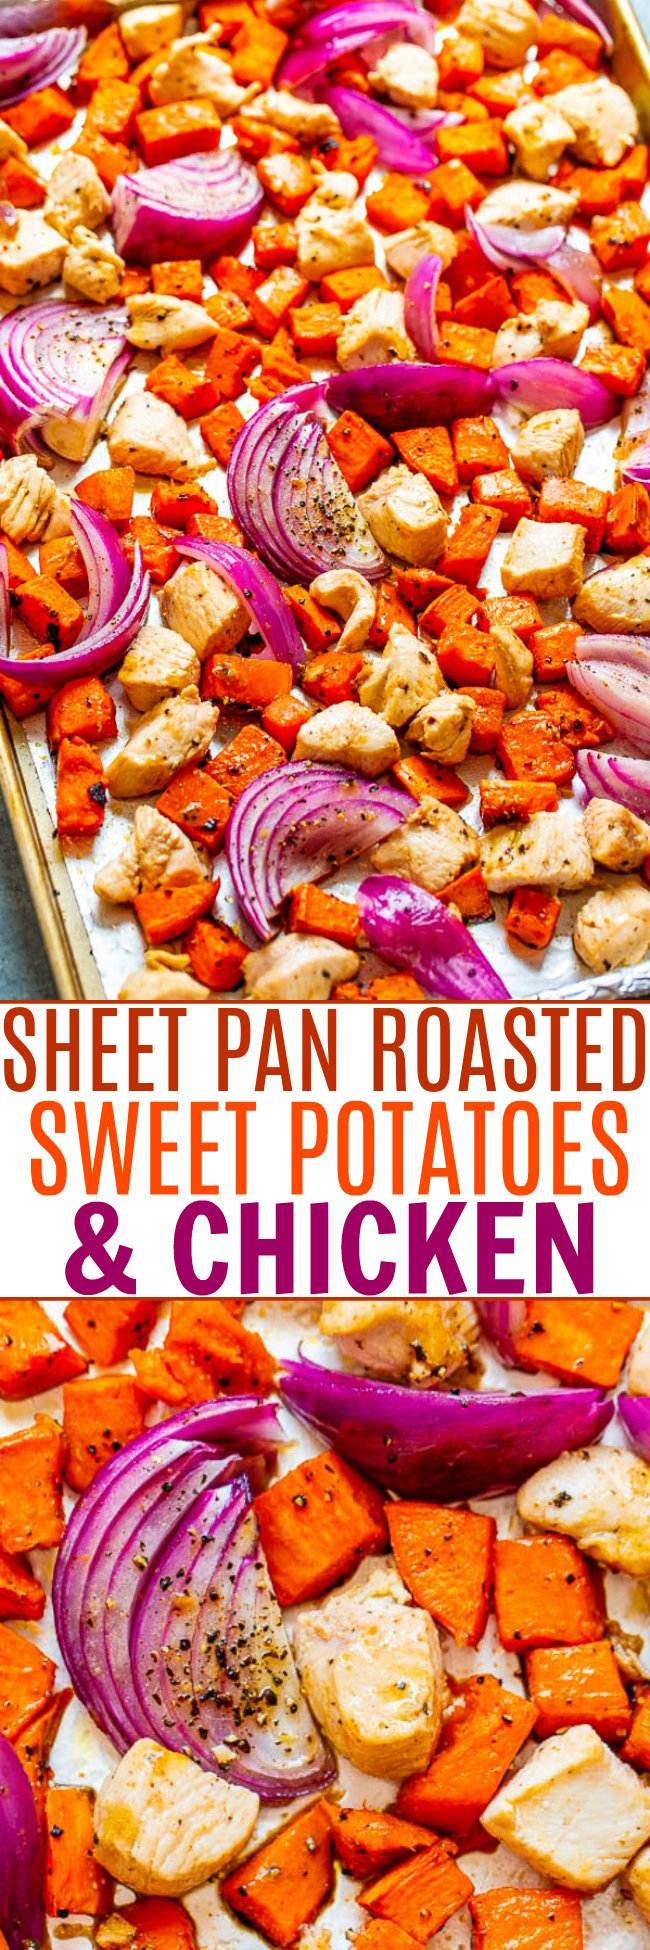 Sheet Pan Chicken and Sweet Potatoes — EASY, HEALTHY, and a great way to enjoy roasted sweet potatoes in less time!! A DELISH one-pan juicy chicken dinner that's ready in 30 minutes with zero cleanup!!